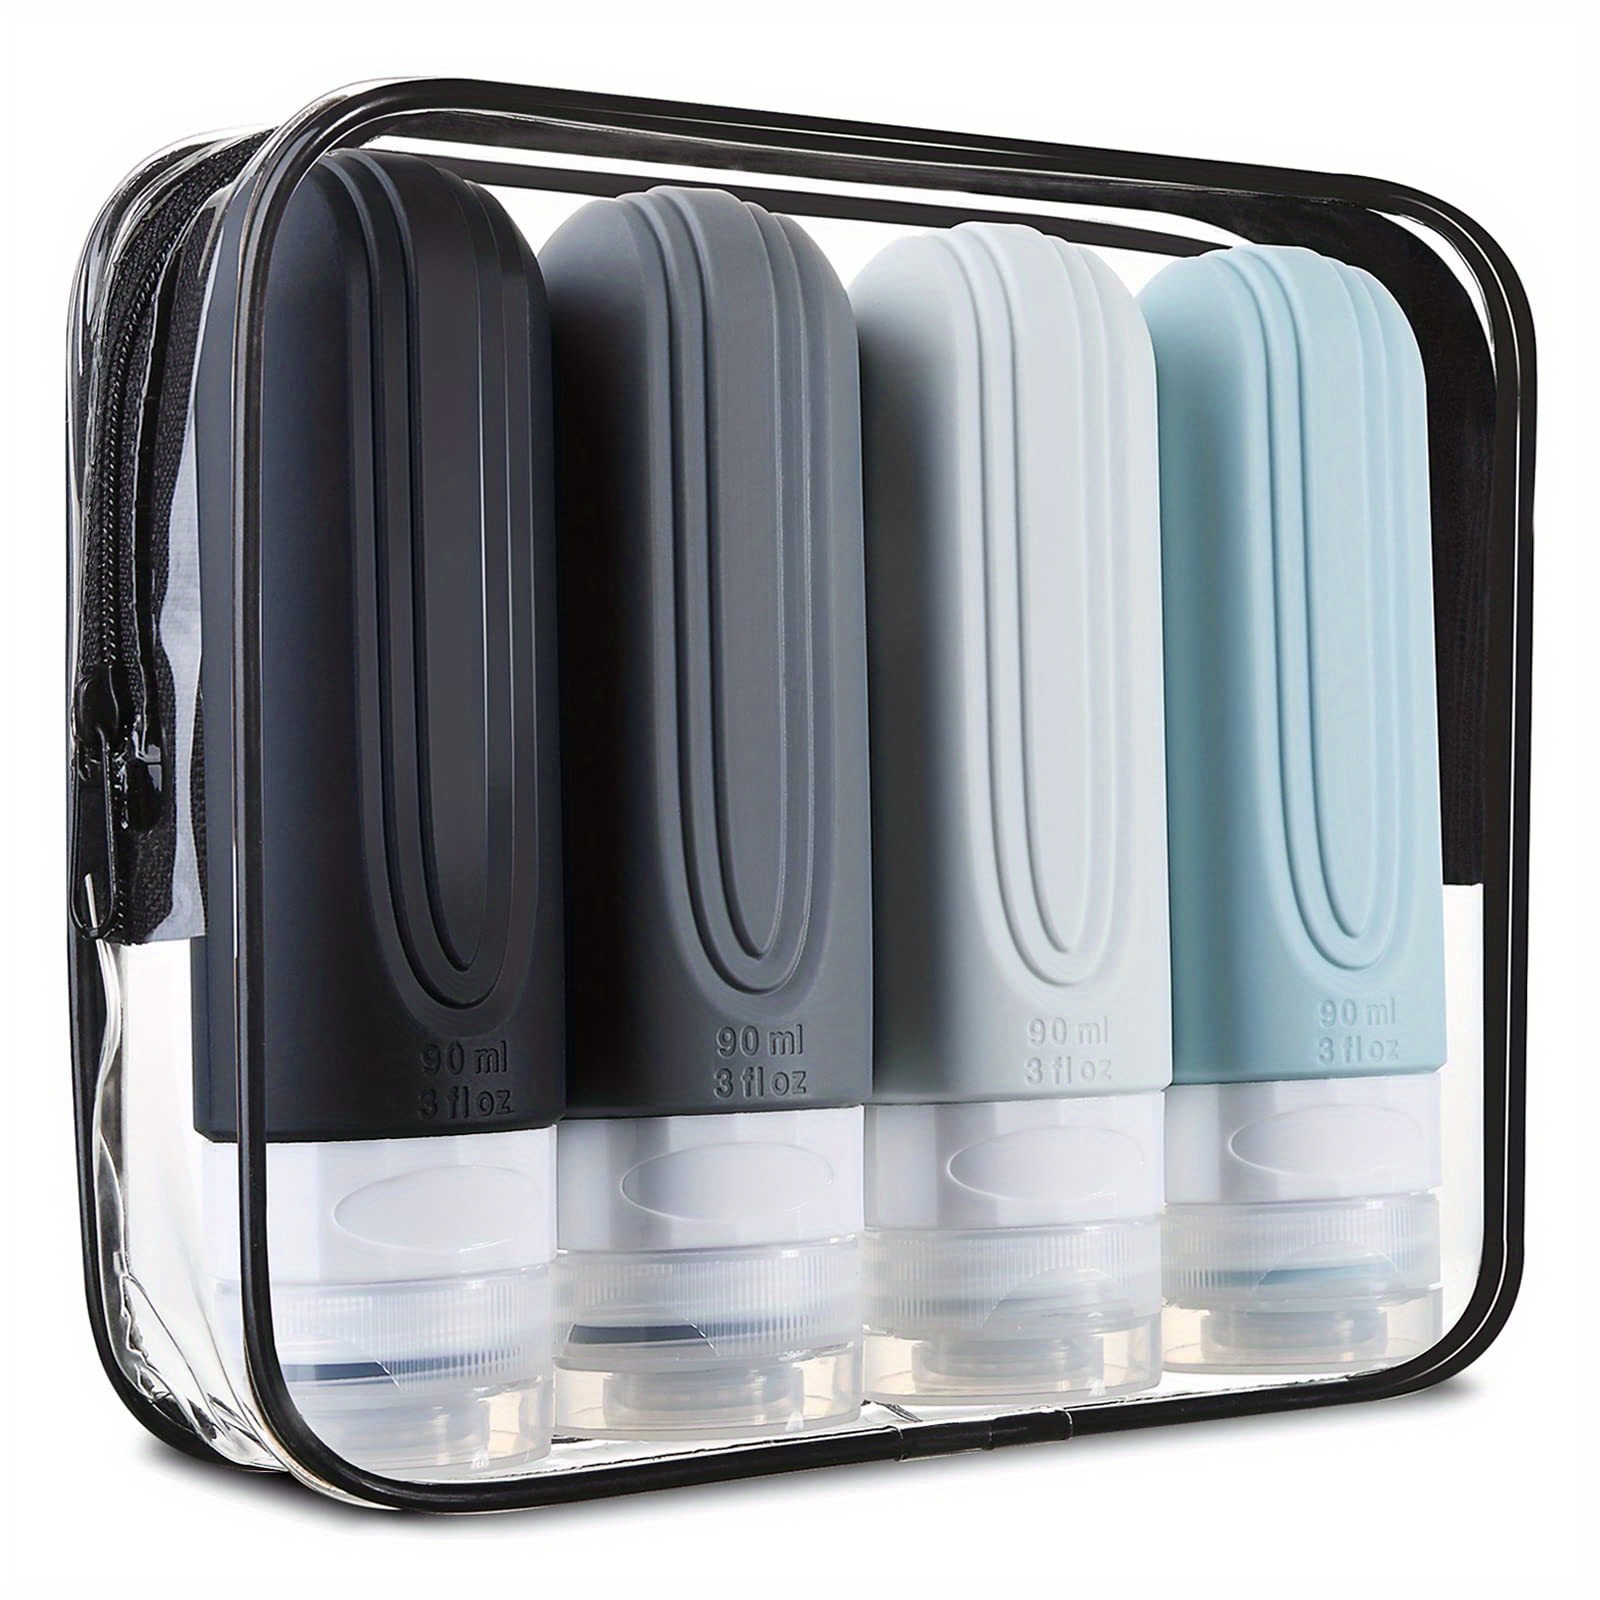 4 Pack Travel Bottles For Toiletries, Tsa Approved 3oz Travel Size Containers BPA Free Leak Proof Refillable Liquid Silicone Squeezable Travel Accessories For Shampoo Conditioner Lotion